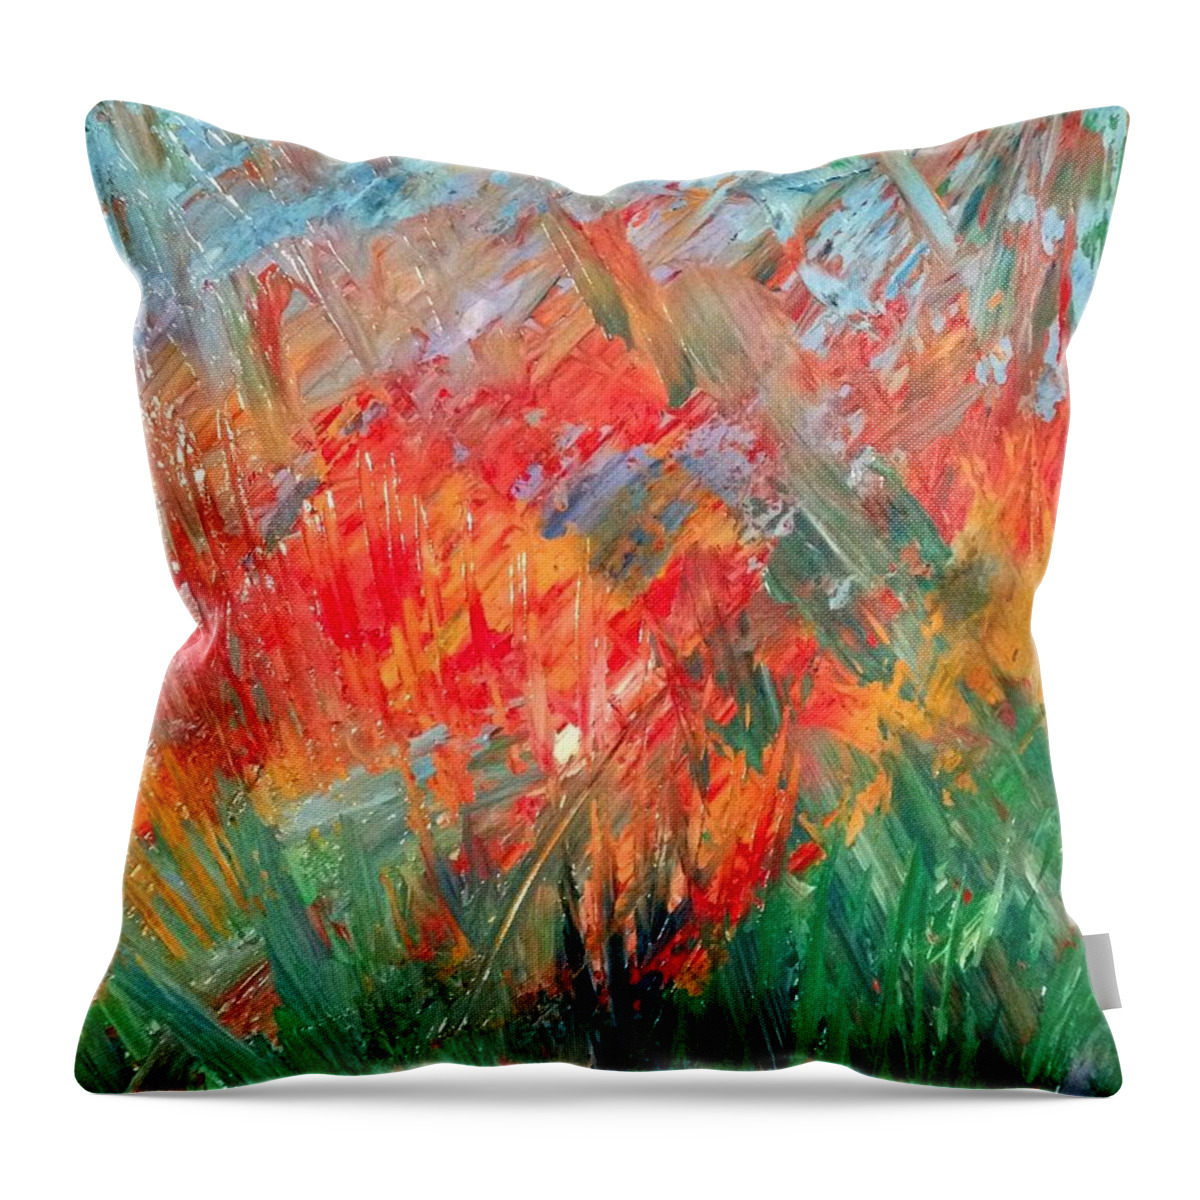  Throw Pillow featuring the painting Tropical Stained Glass by MiMi Stirn